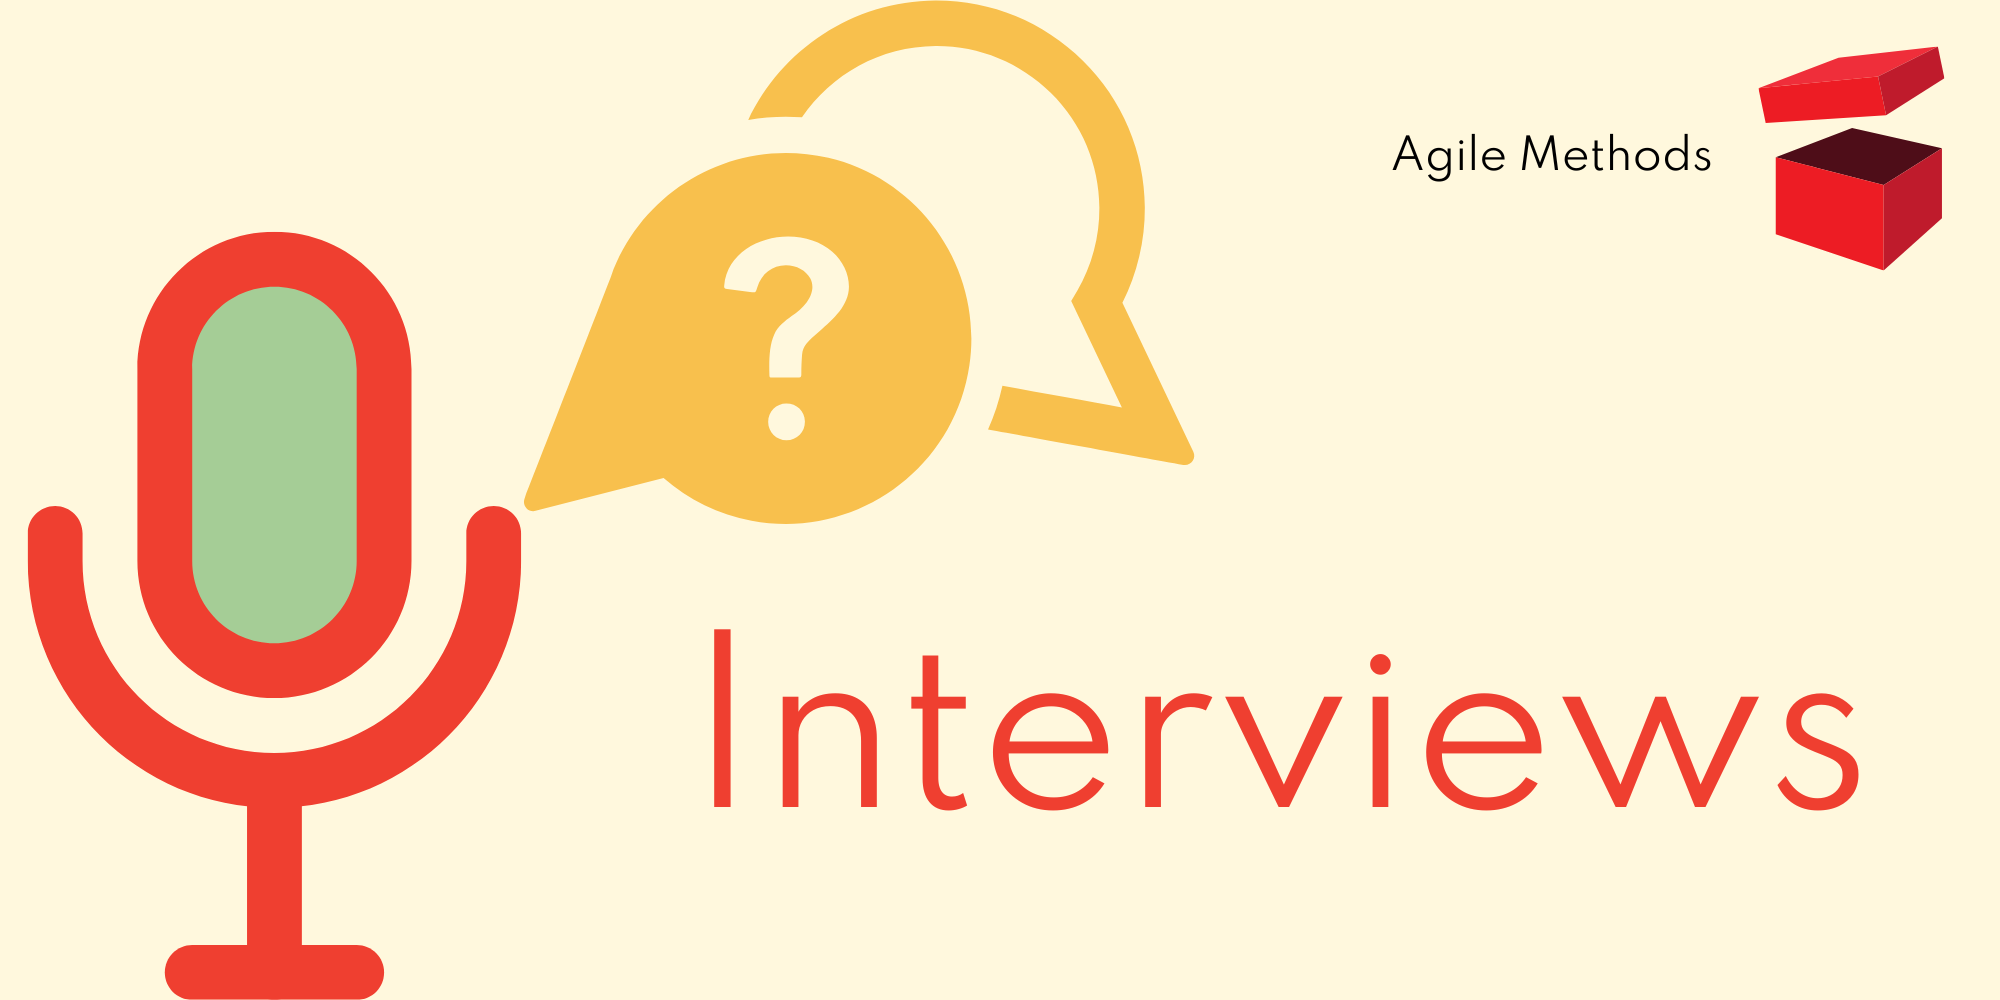 Interviews to gather insights.